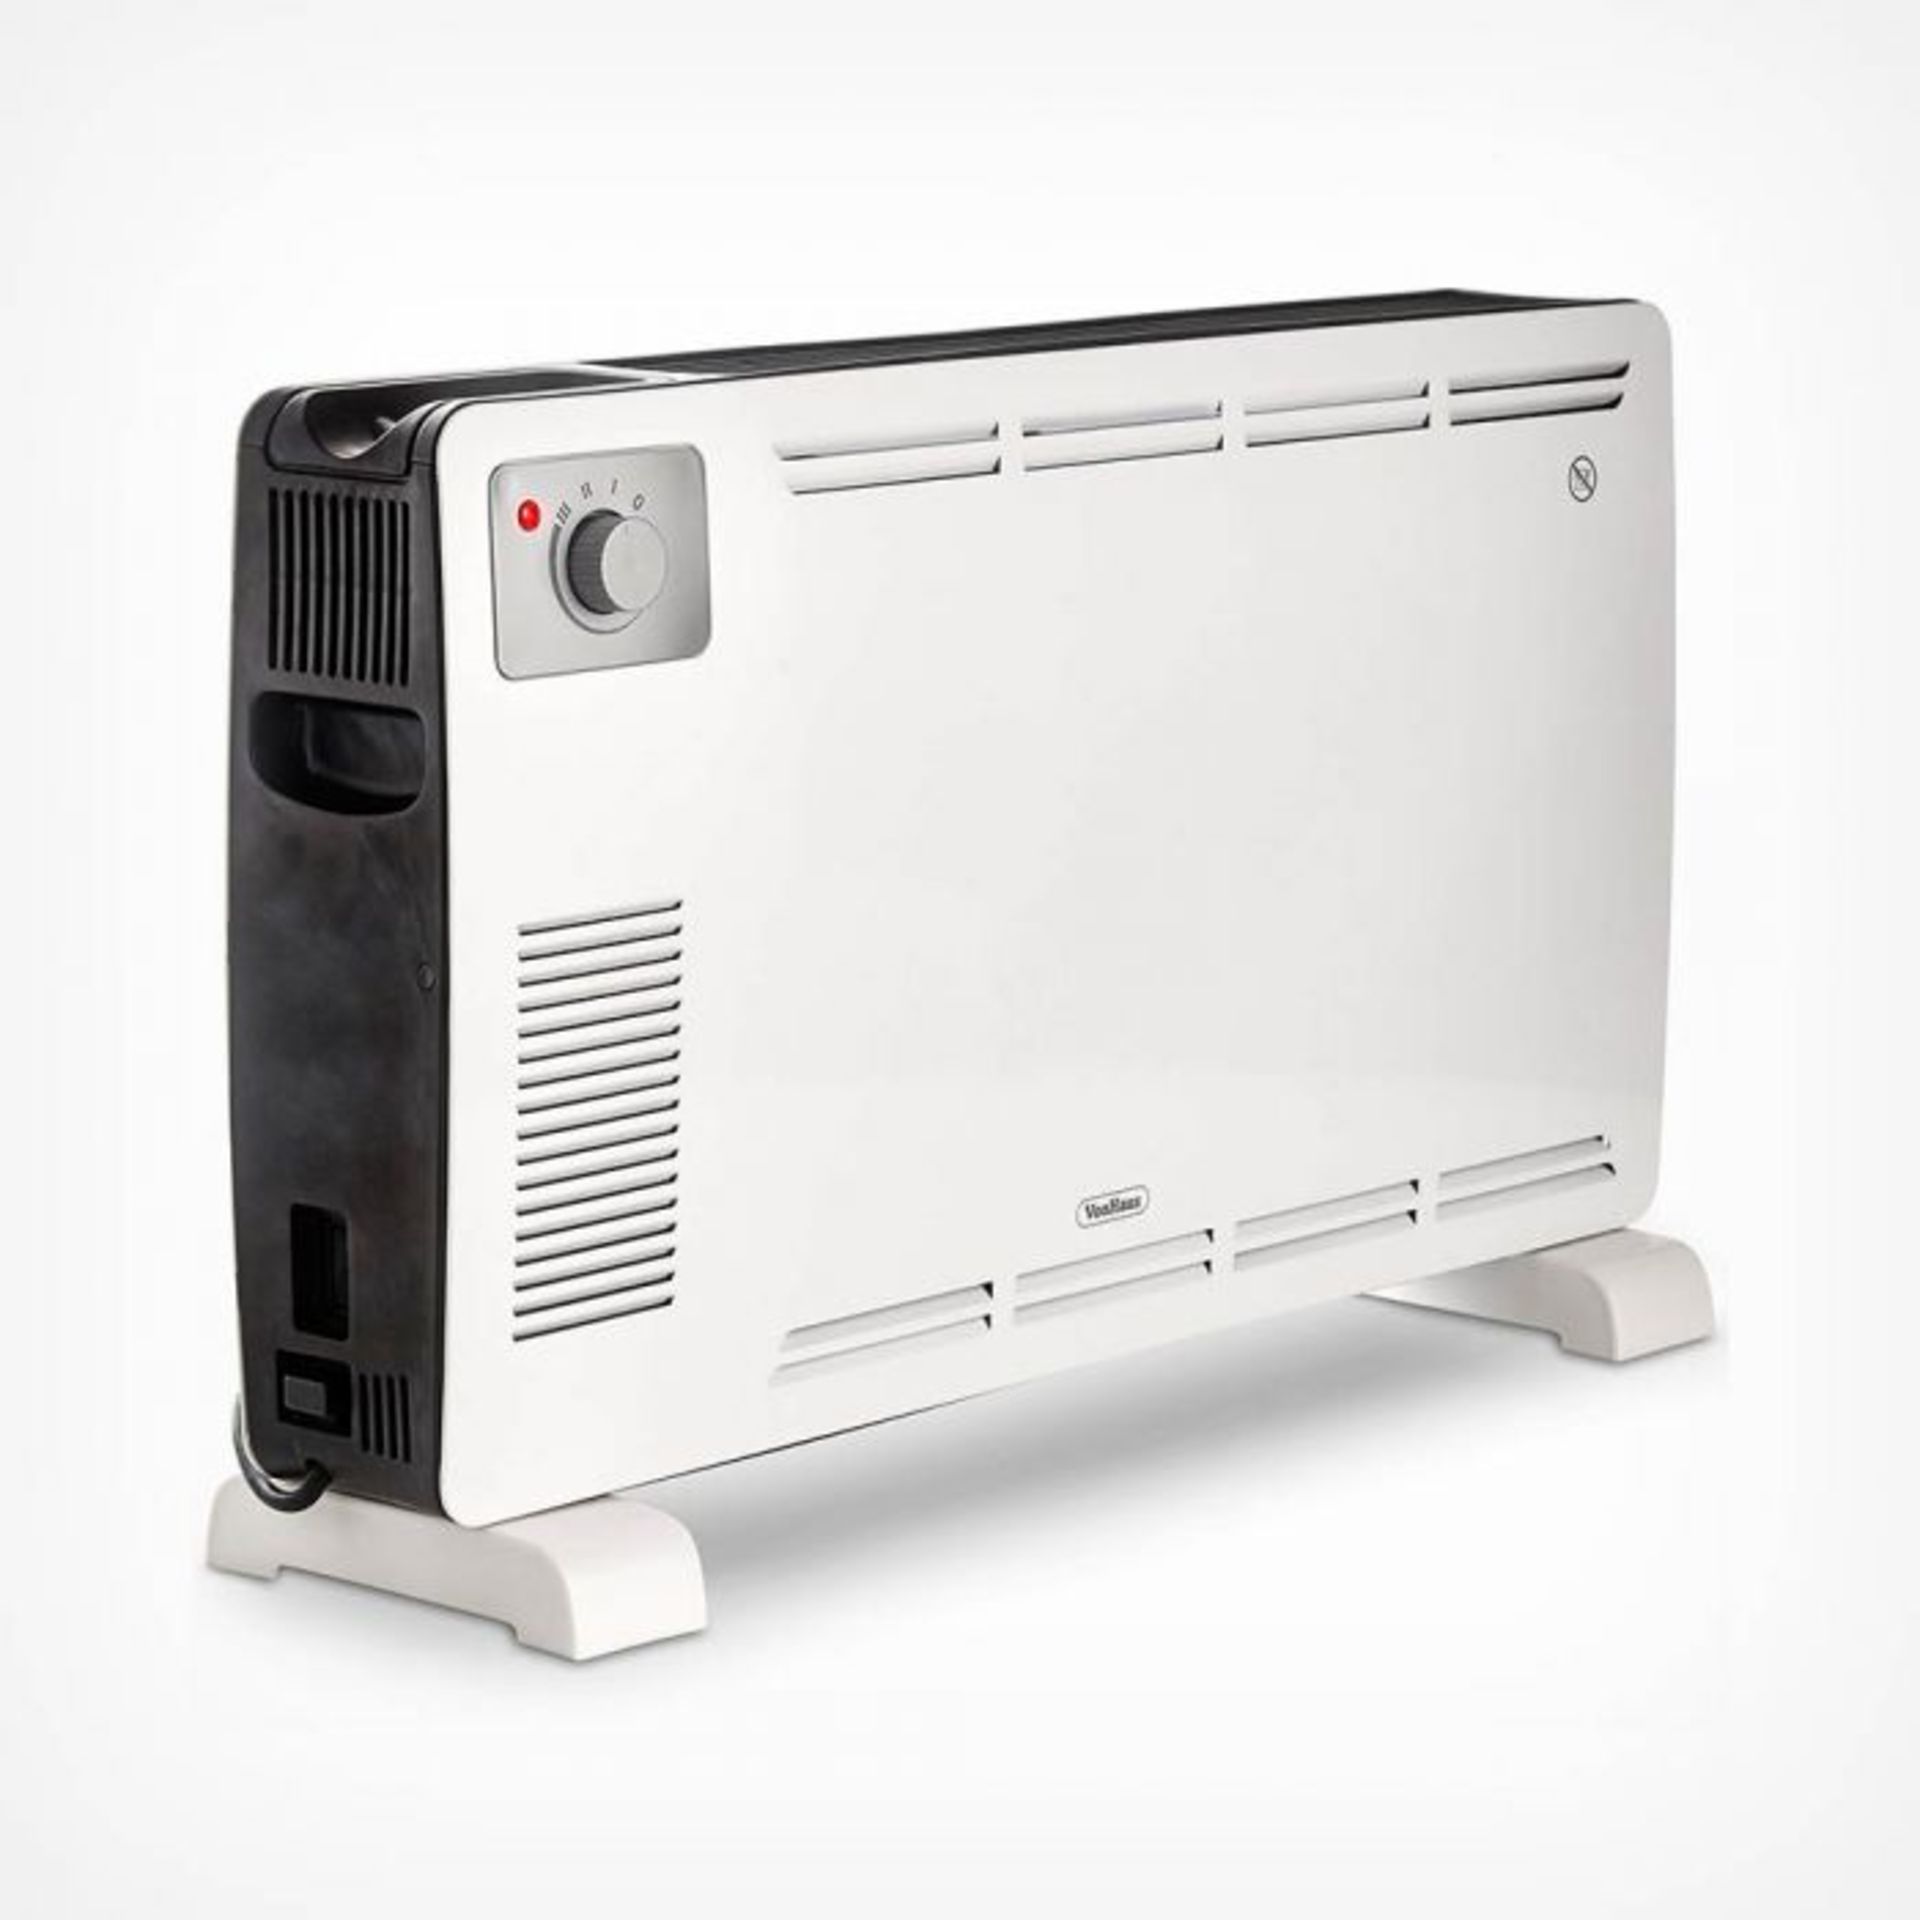 2000W Convector Heater - White. This convector heats up quickly thanks to convection technology.